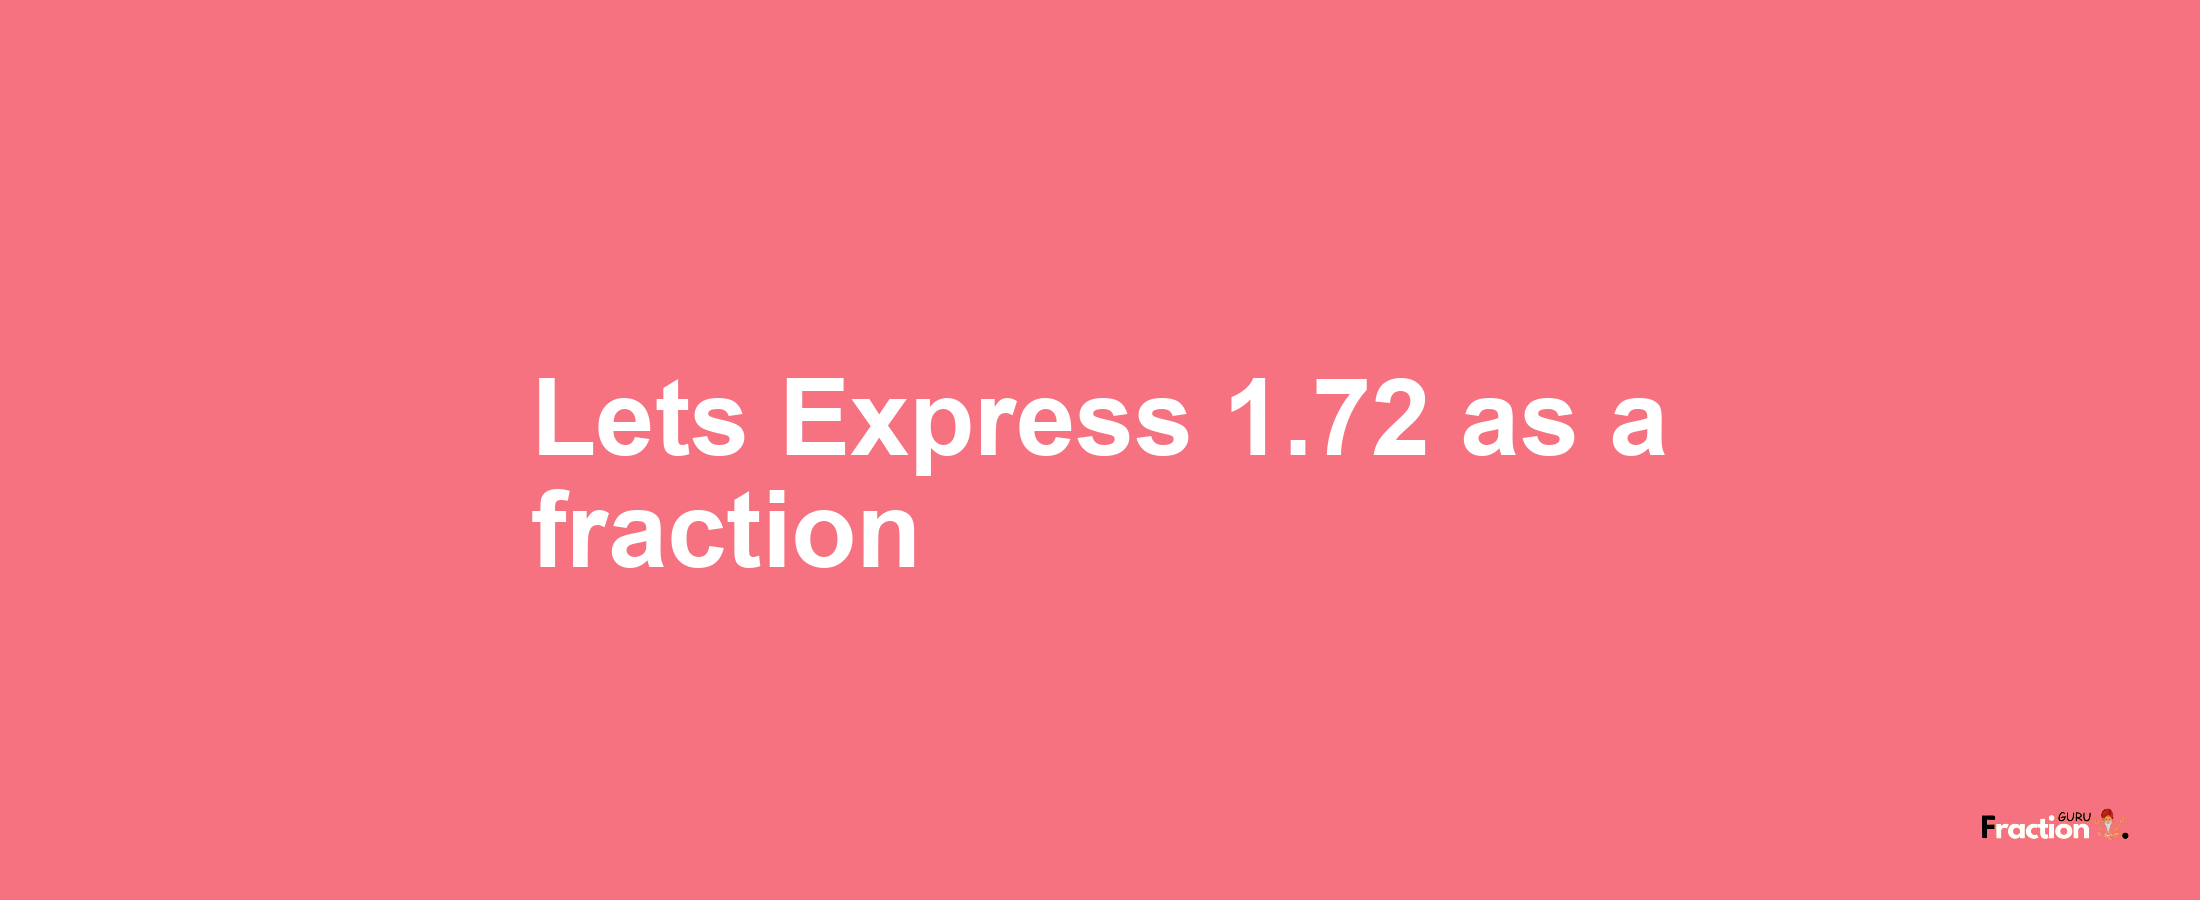 Lets Express 1.72 as afraction